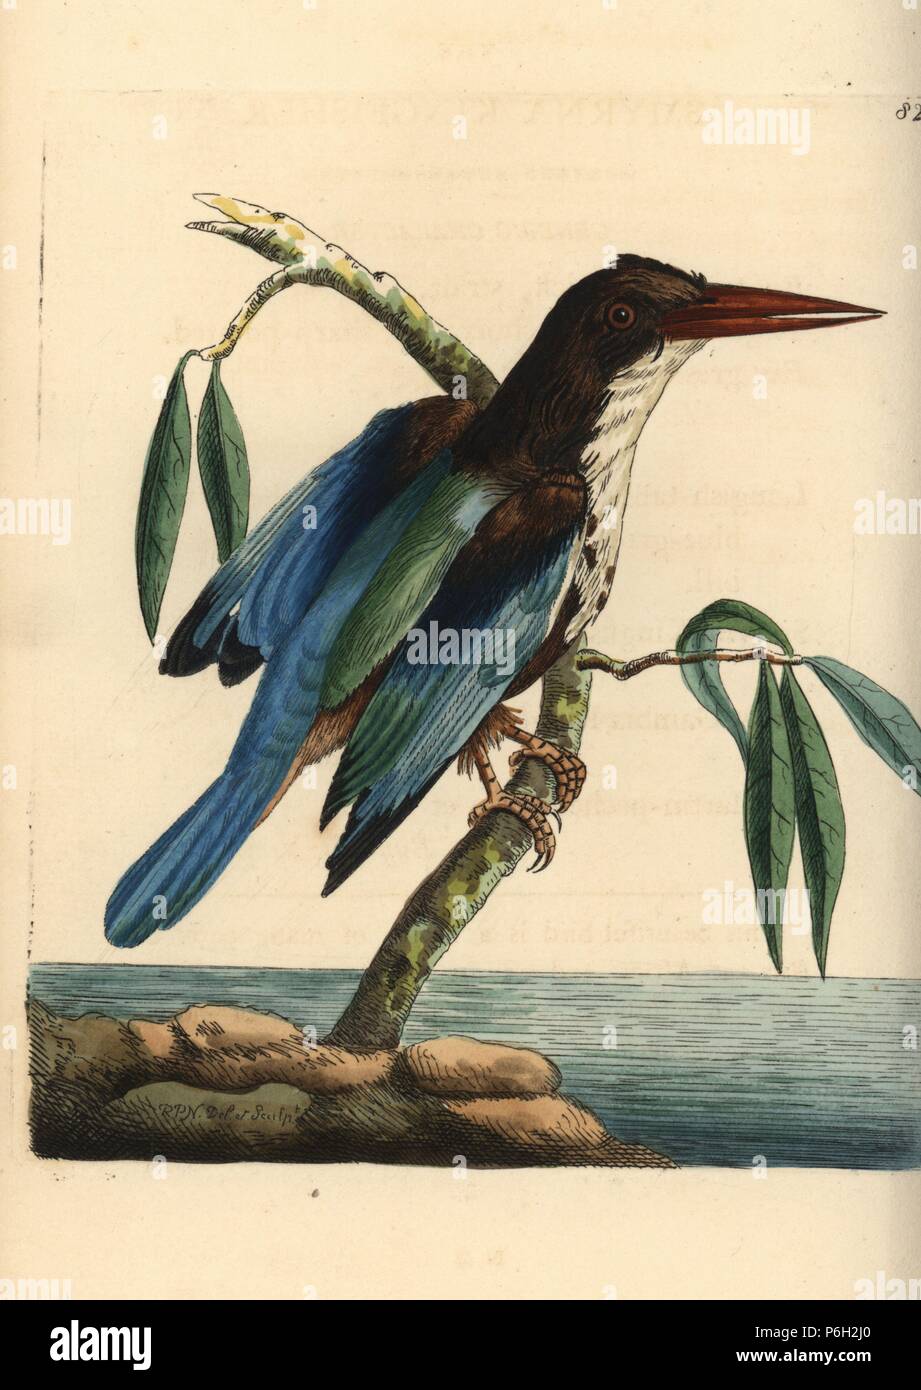 White-throated kingfisher, Halcyon smyrnensis (Smyrna kingfisher, Alcedo smyrnensis). Illustration drawn and engraved by Richard Polydore Nodder. Handcoloured copperplate engraving from George Shaw and Frederick Nodder's The Naturalist's Miscellany, London, 1806. Stock Photo